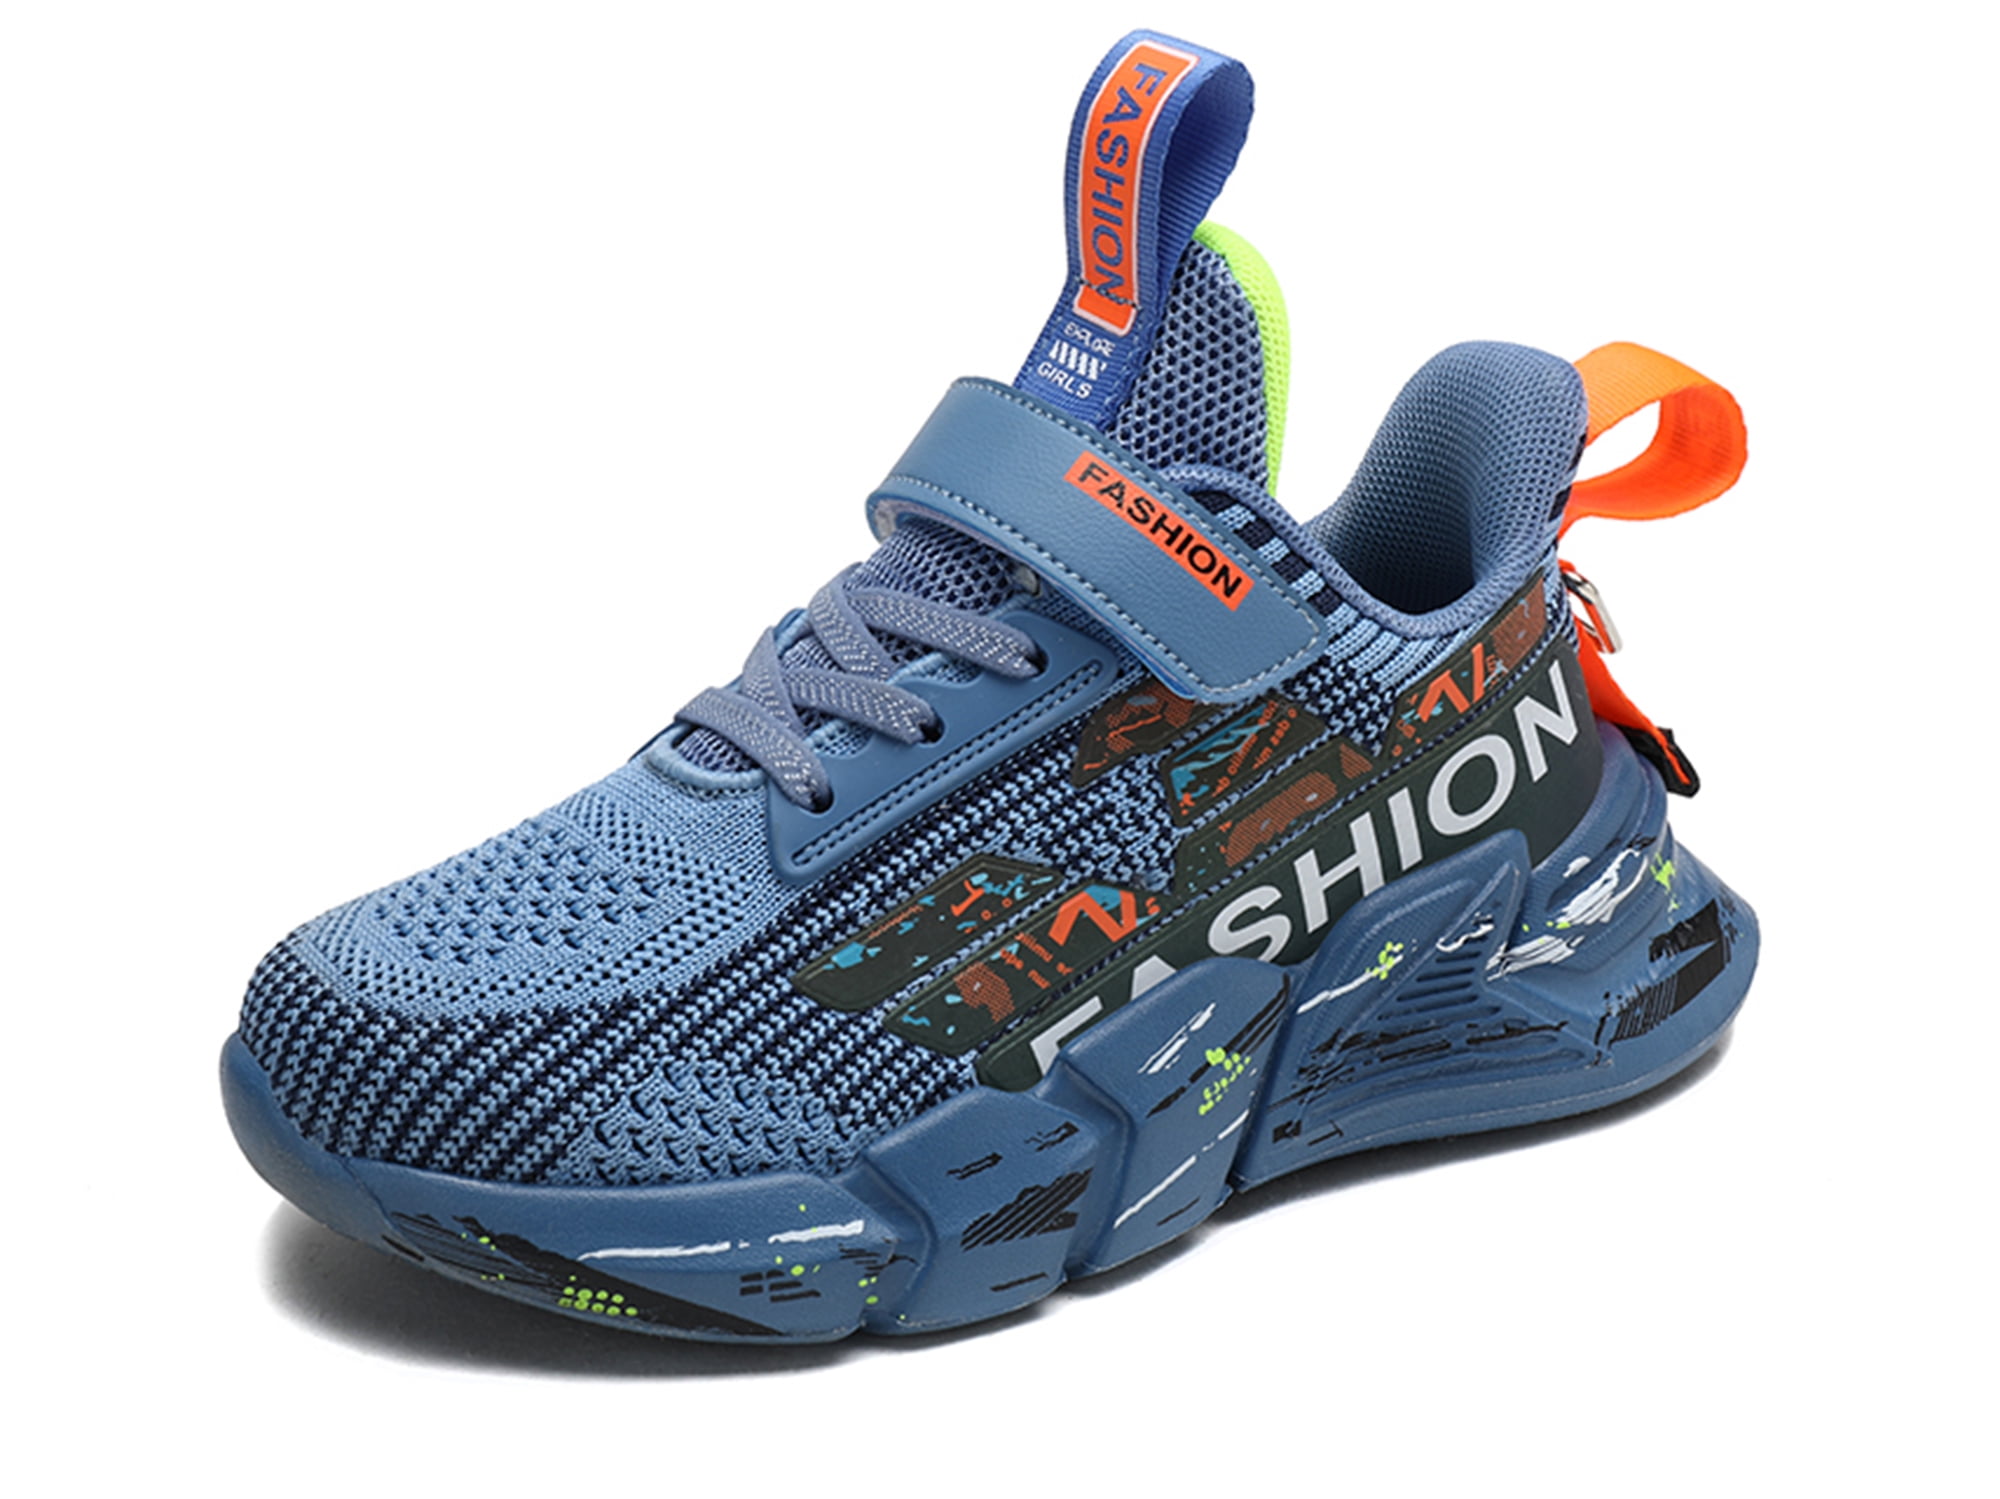 Details about   Kids Boys Girls Casual Sneakers Running Tennis Sports Athletic Breathable Shoes 